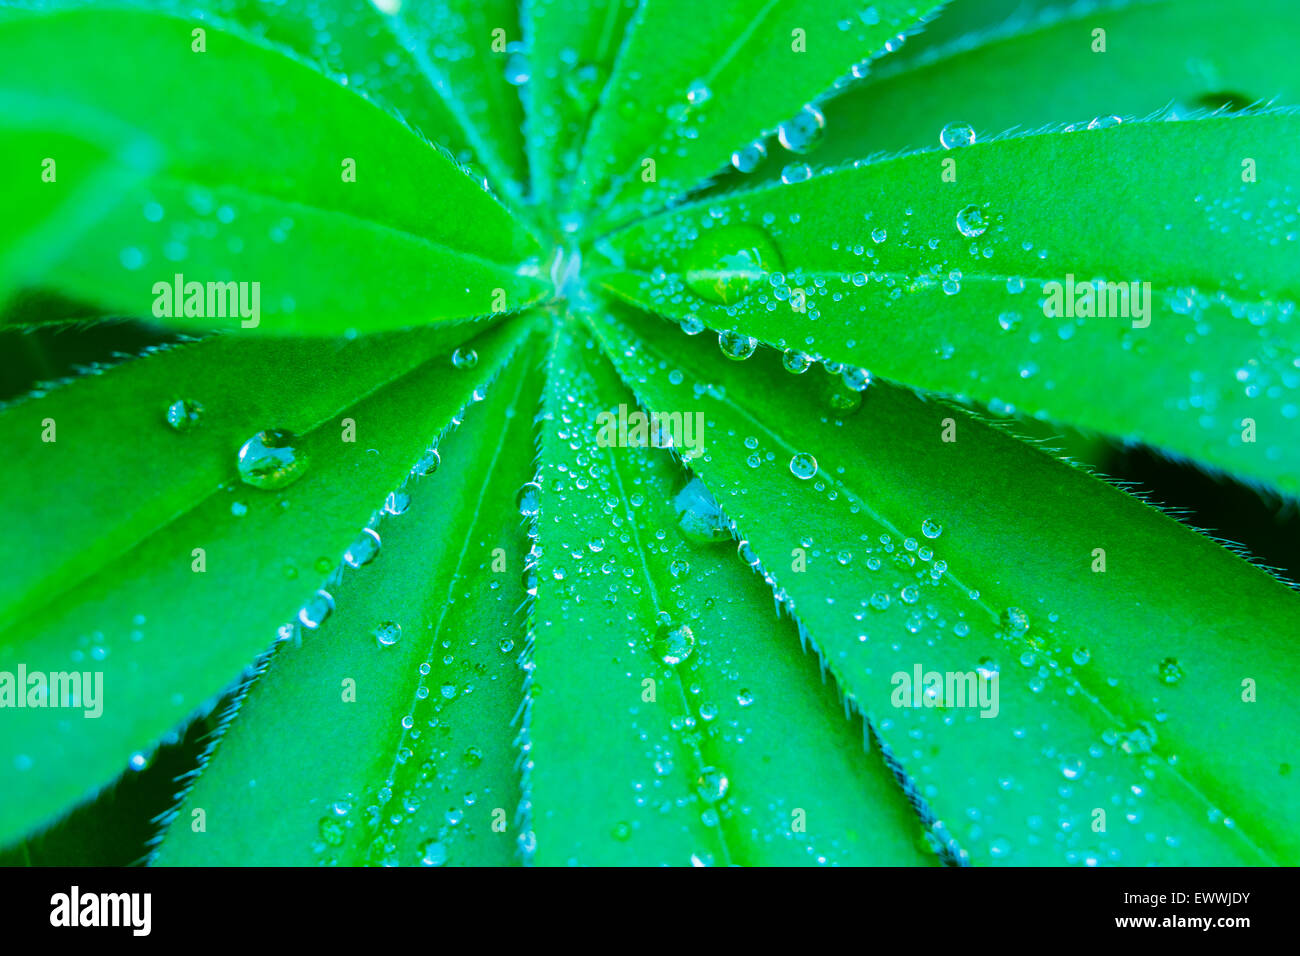 A close image of lupin leaf with dew drops. Stock Photo